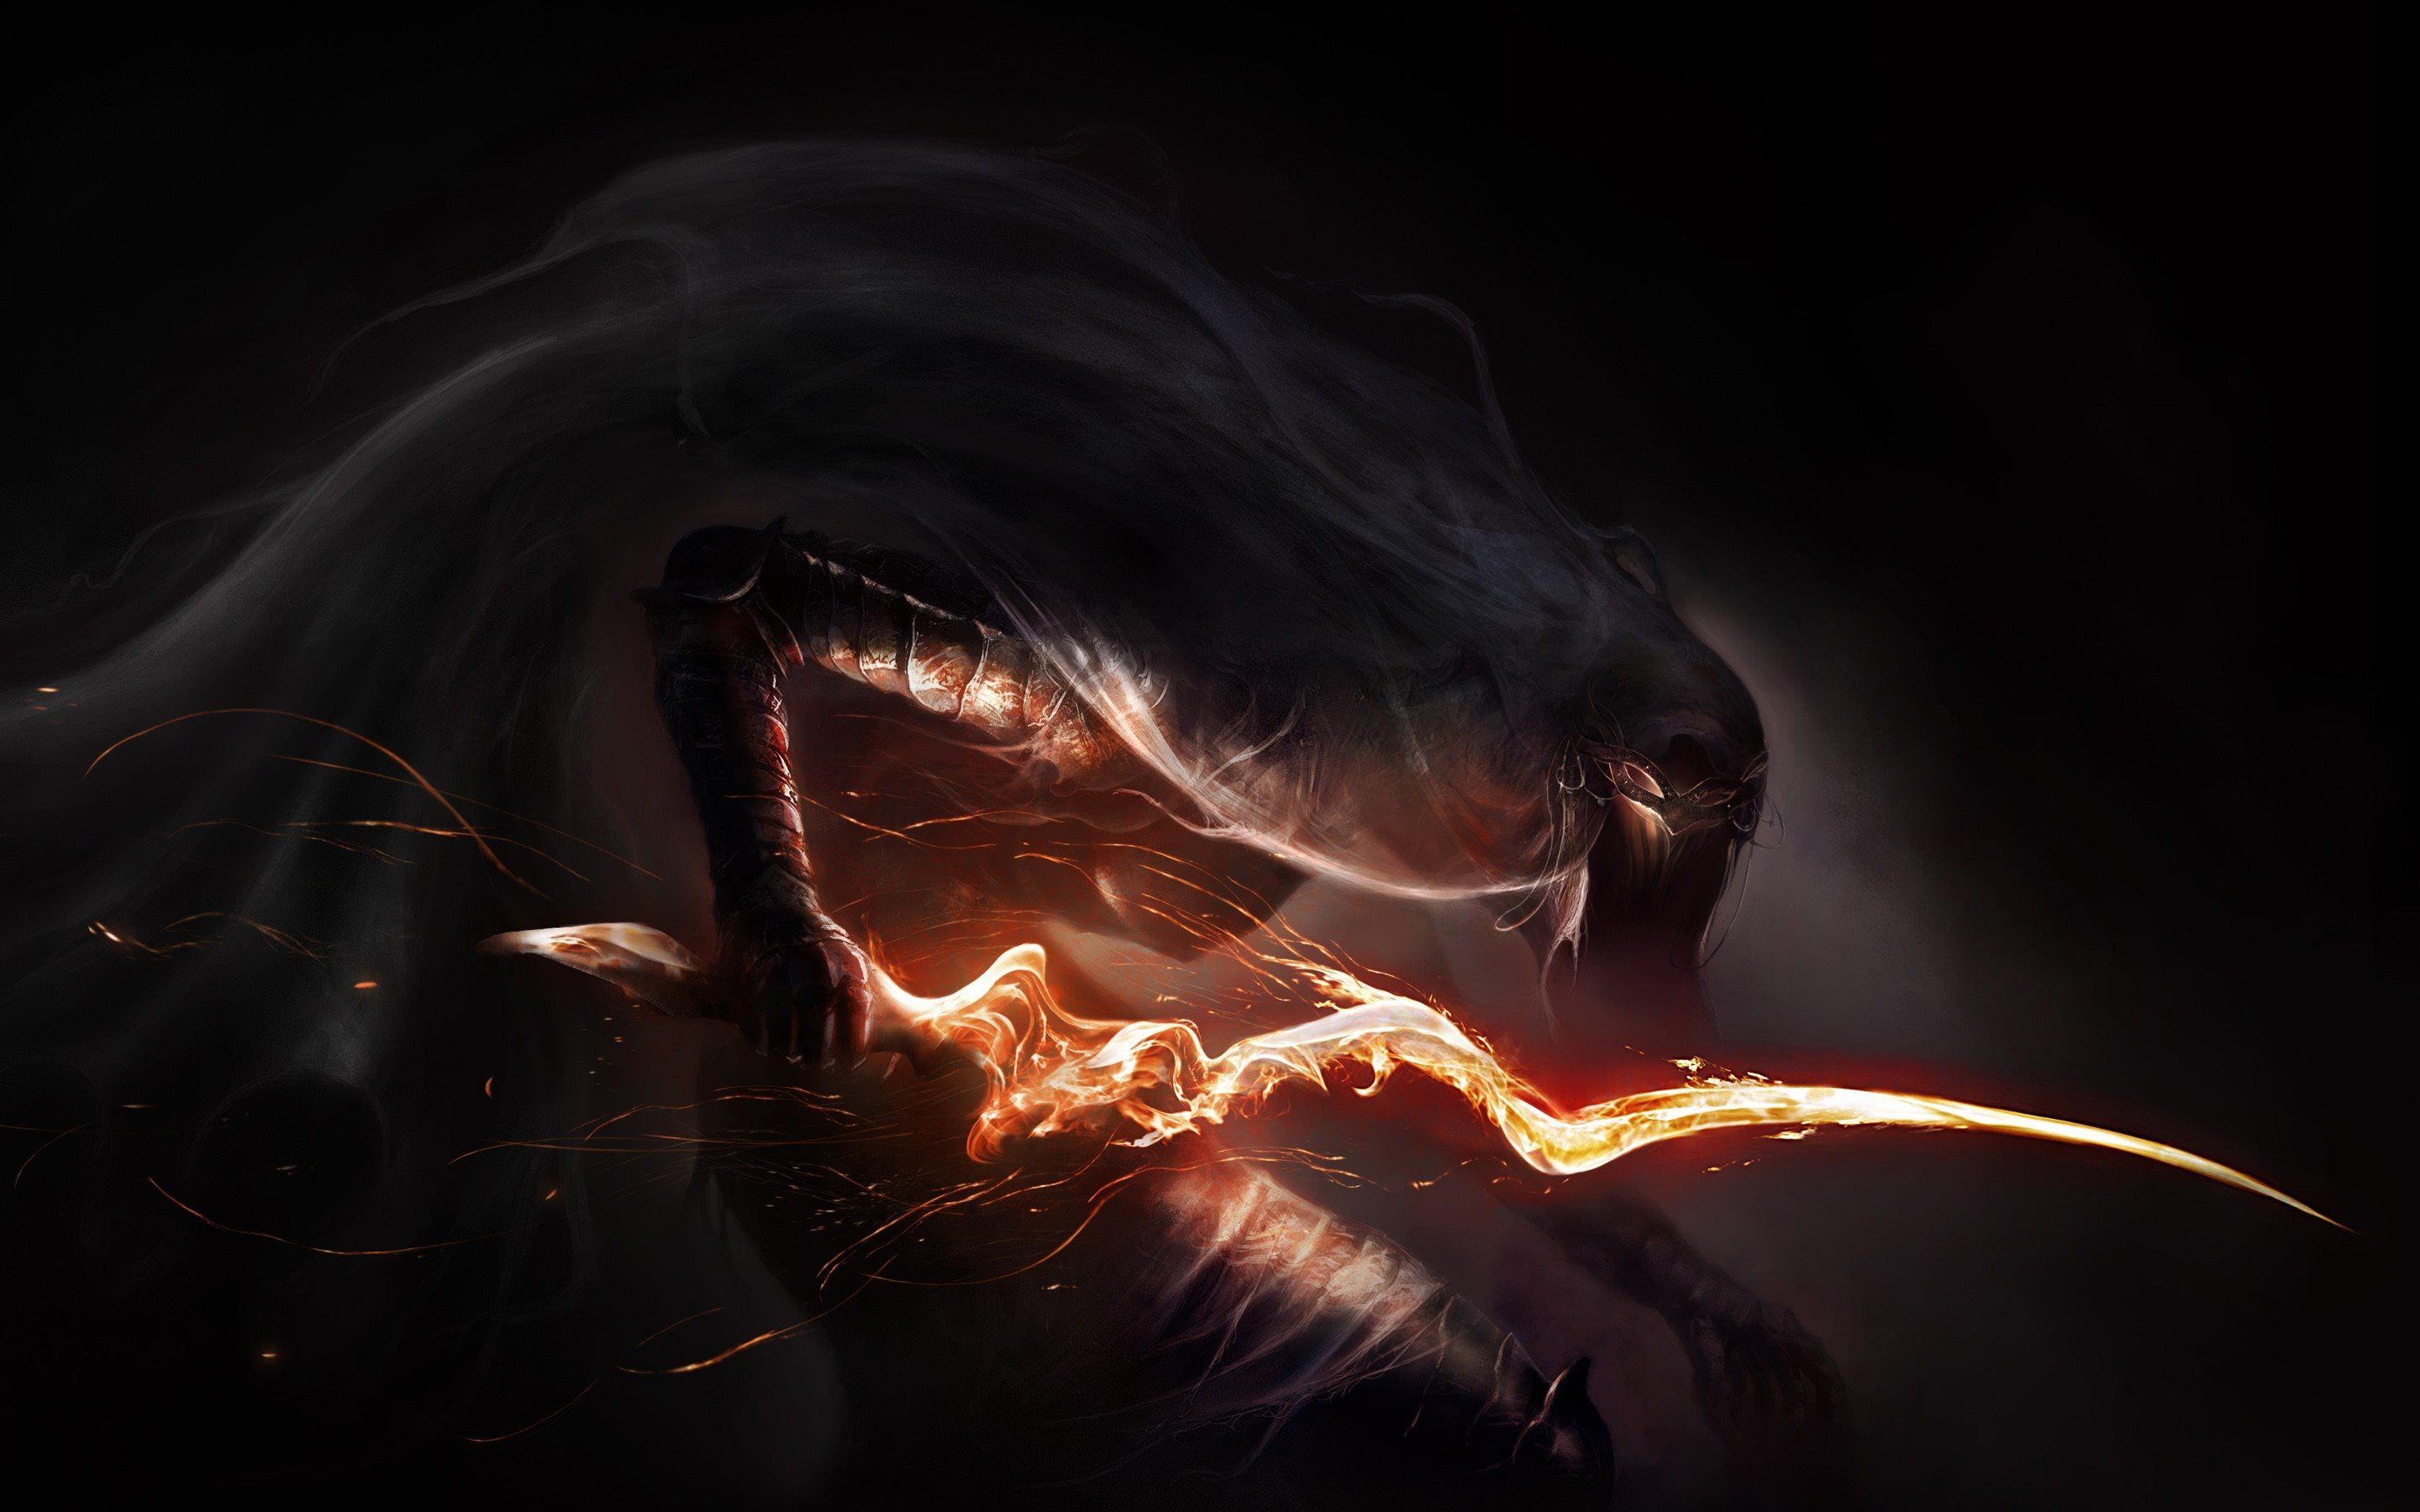 Download wallpaper Dark Souls fire sword, monster for desktop with resolution 2880x1800. High Quality HD picture wallpaper